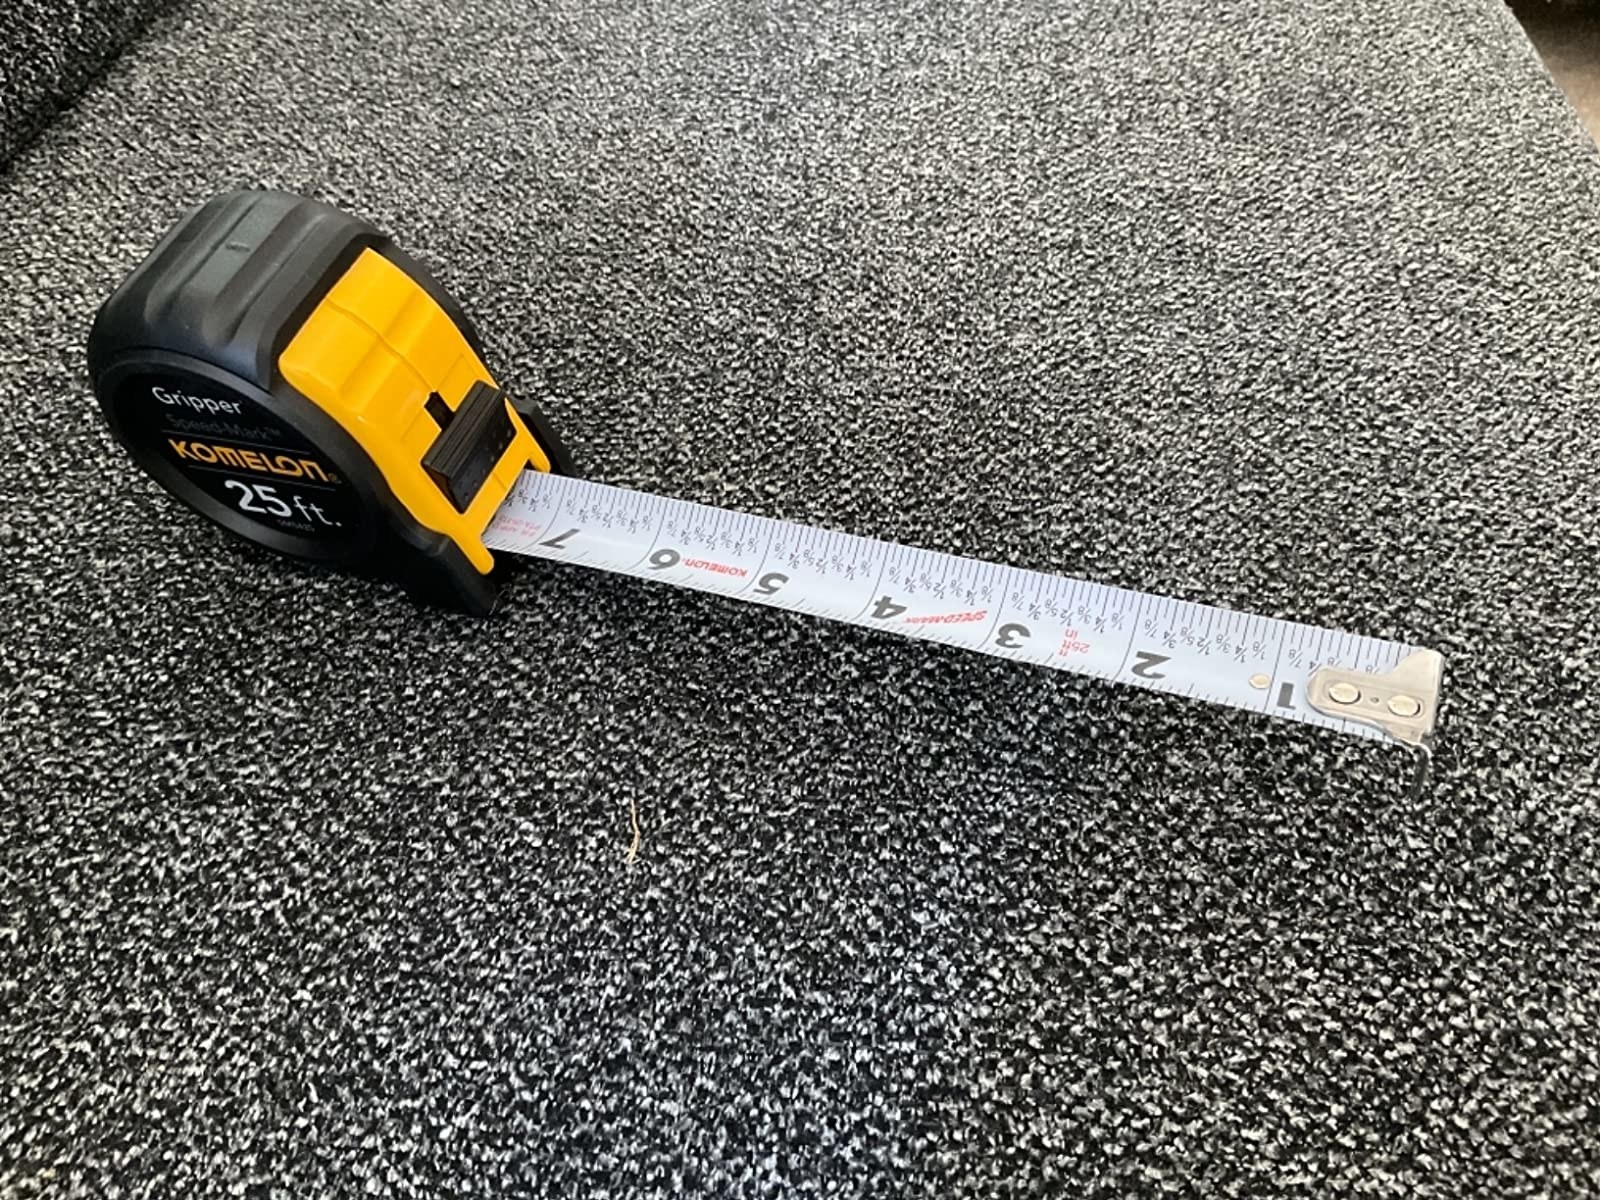 reviewer image of the komelon measuring tape extended out to seven inches